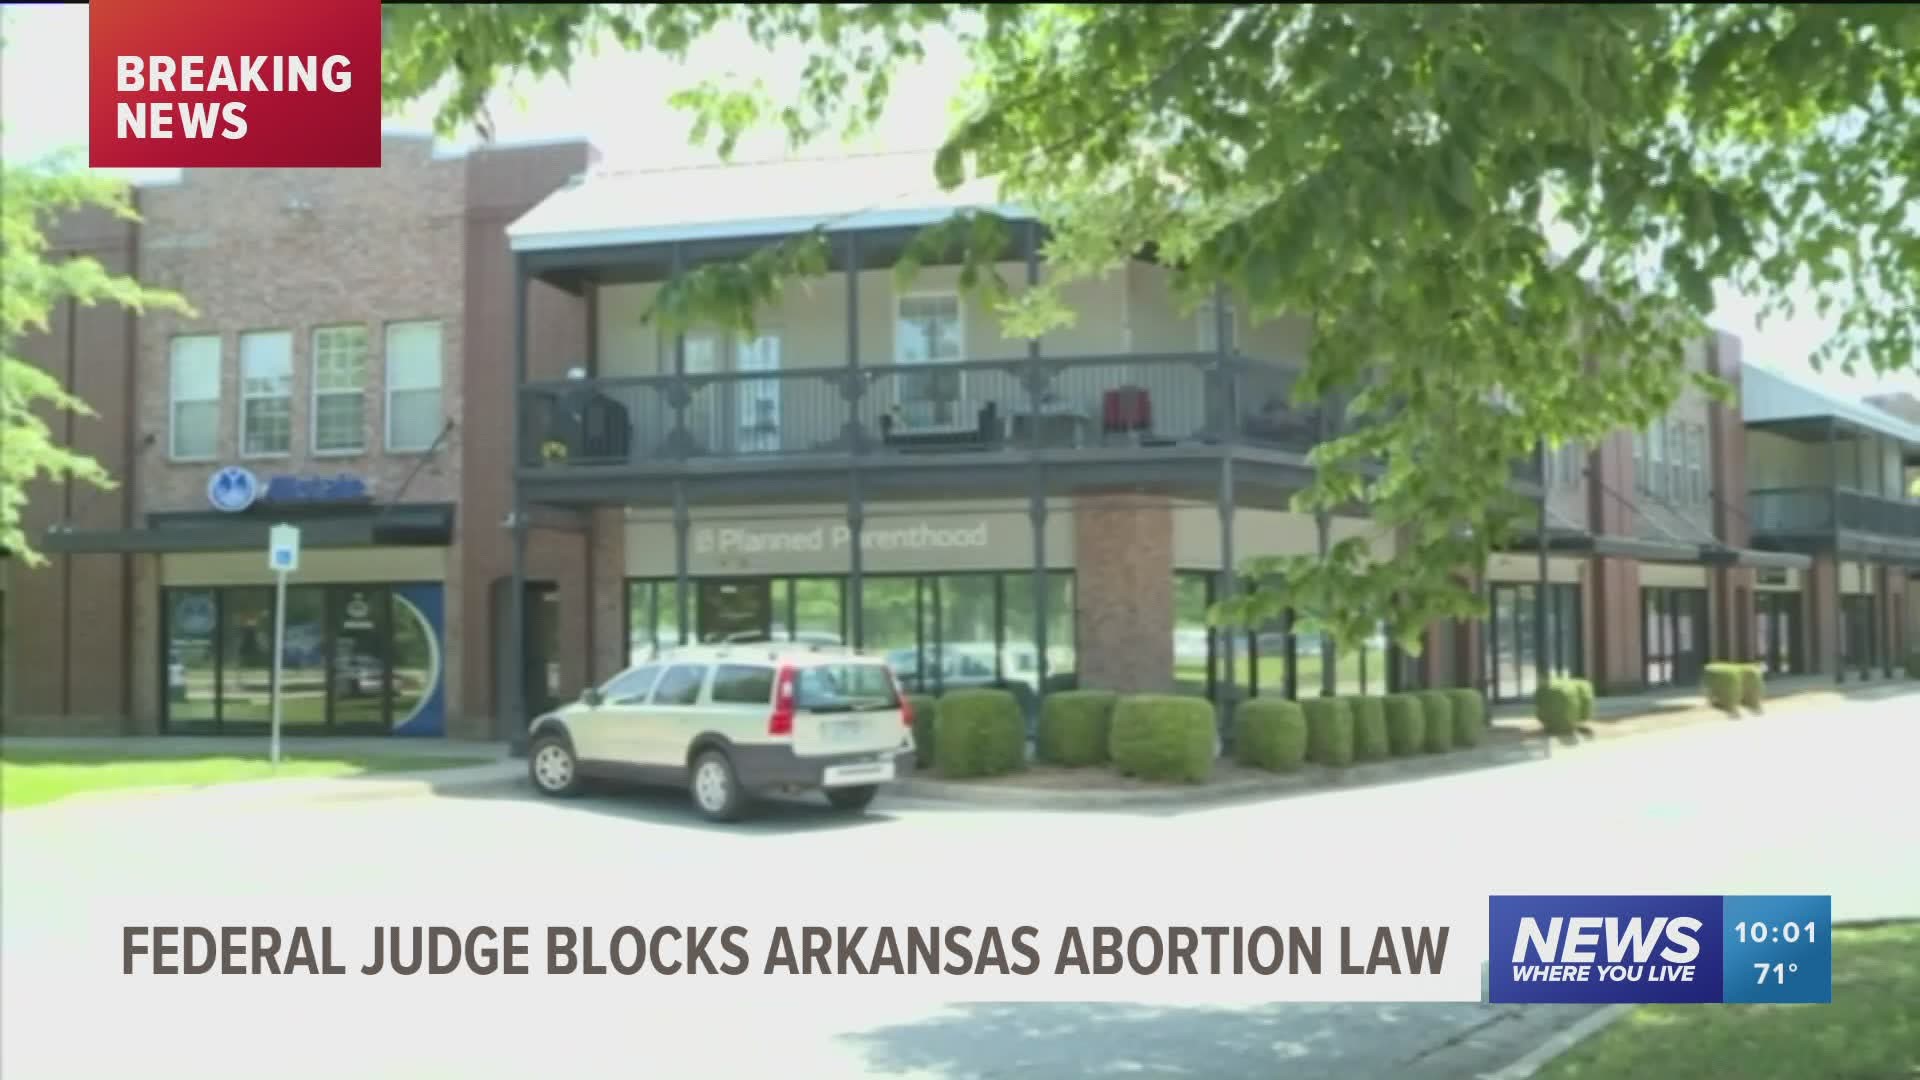 A federal judge on Tuesday blocked an Arkansas law banning nearly all abortions in the state while she hears a challenge to its constitutionality.